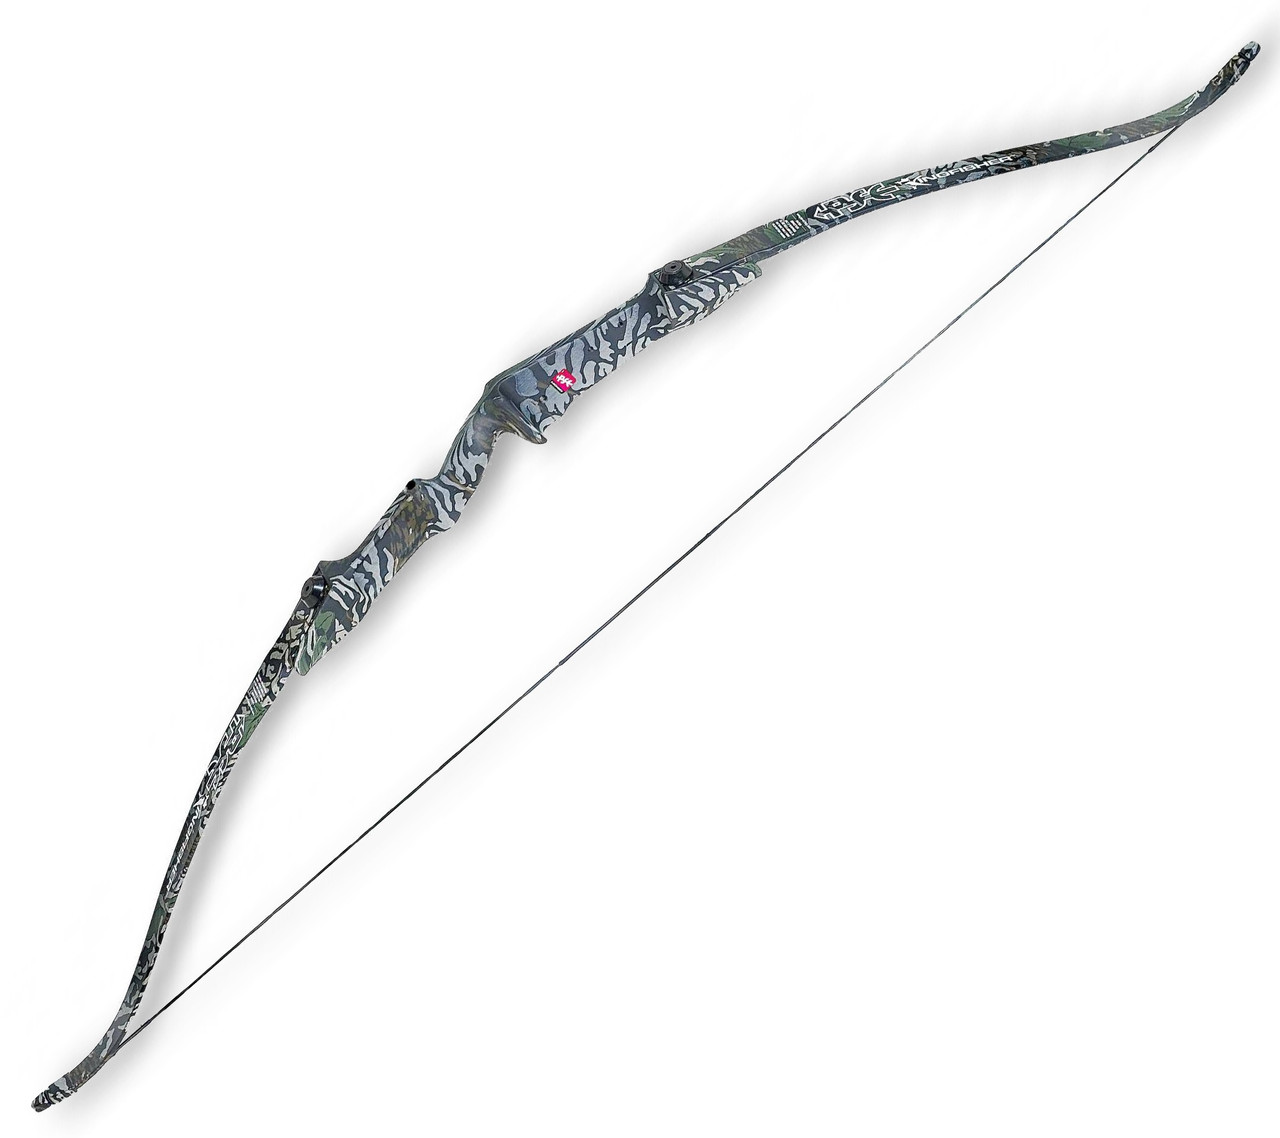 PSE Kingfisher Right Hand 60 inch 40 lb Bowfishing Recurve Bow